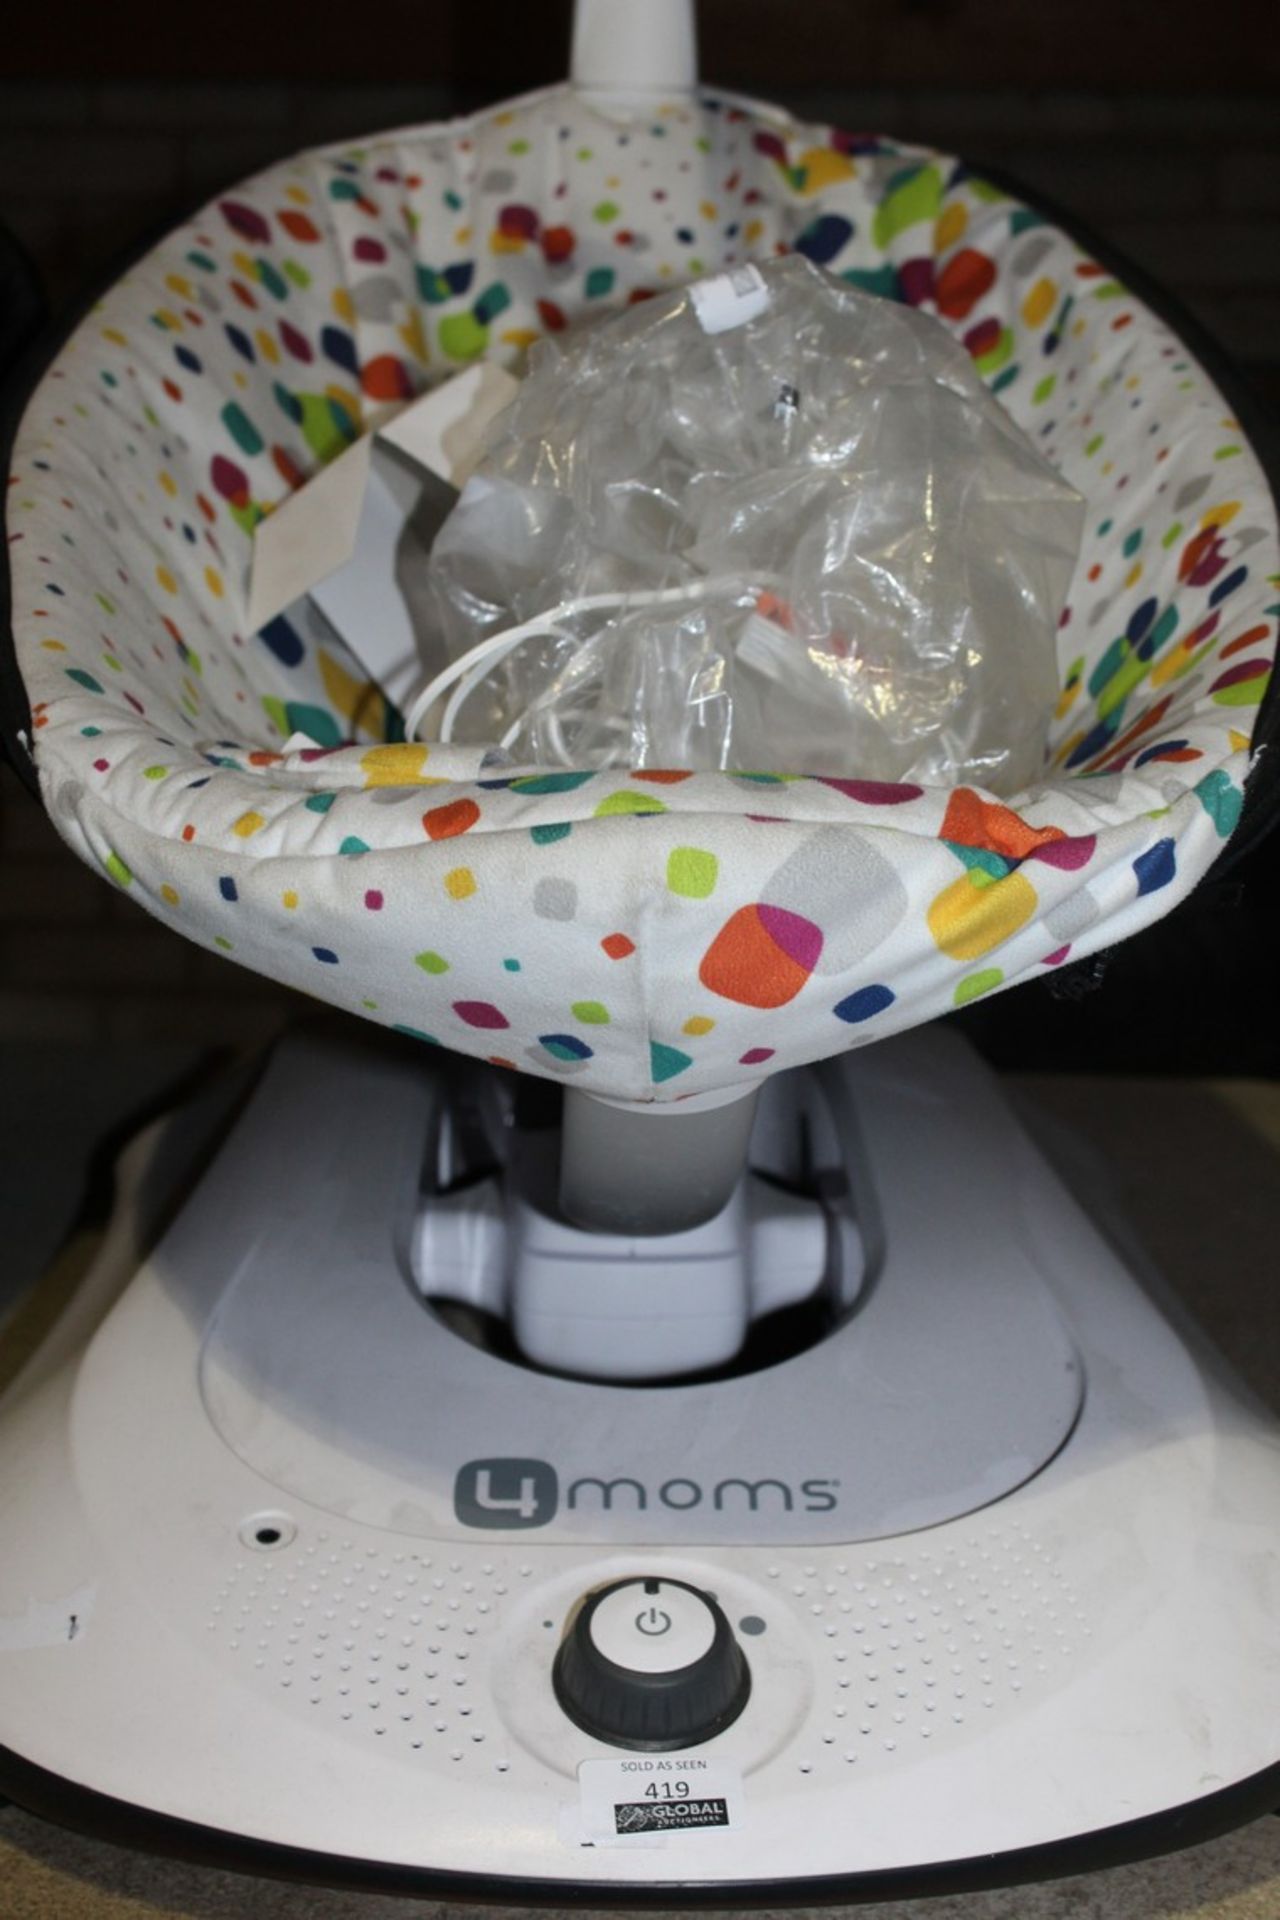 For Mums Mamaroo Kids Rocker Chair RRP £350 (Public Viewing and Appraisals Available)